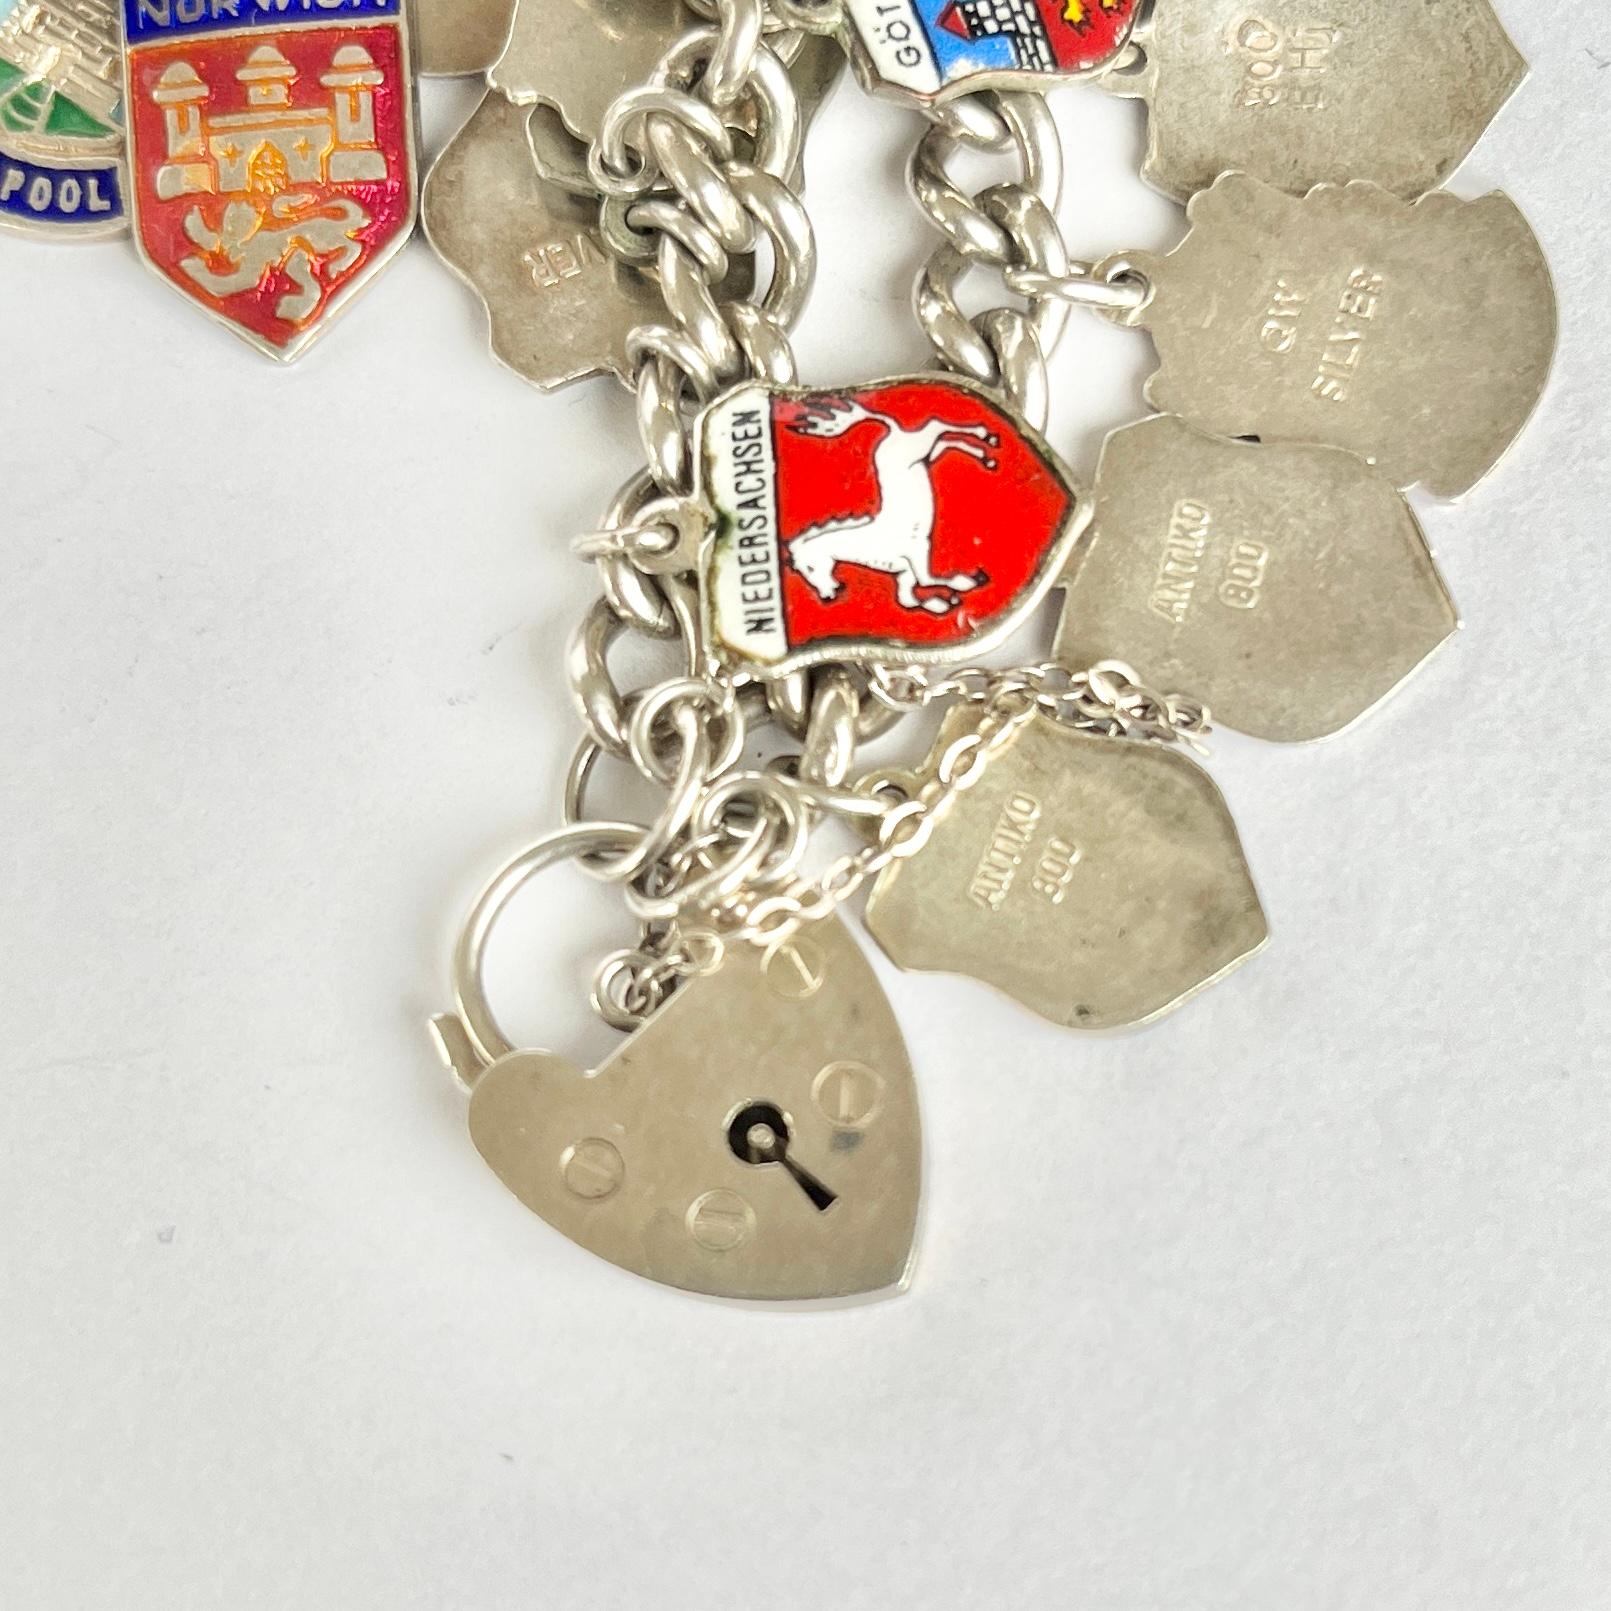 Antique Silver Bracelet With City Shield Charms In Good Condition For Sale In Chipping Campden, GB